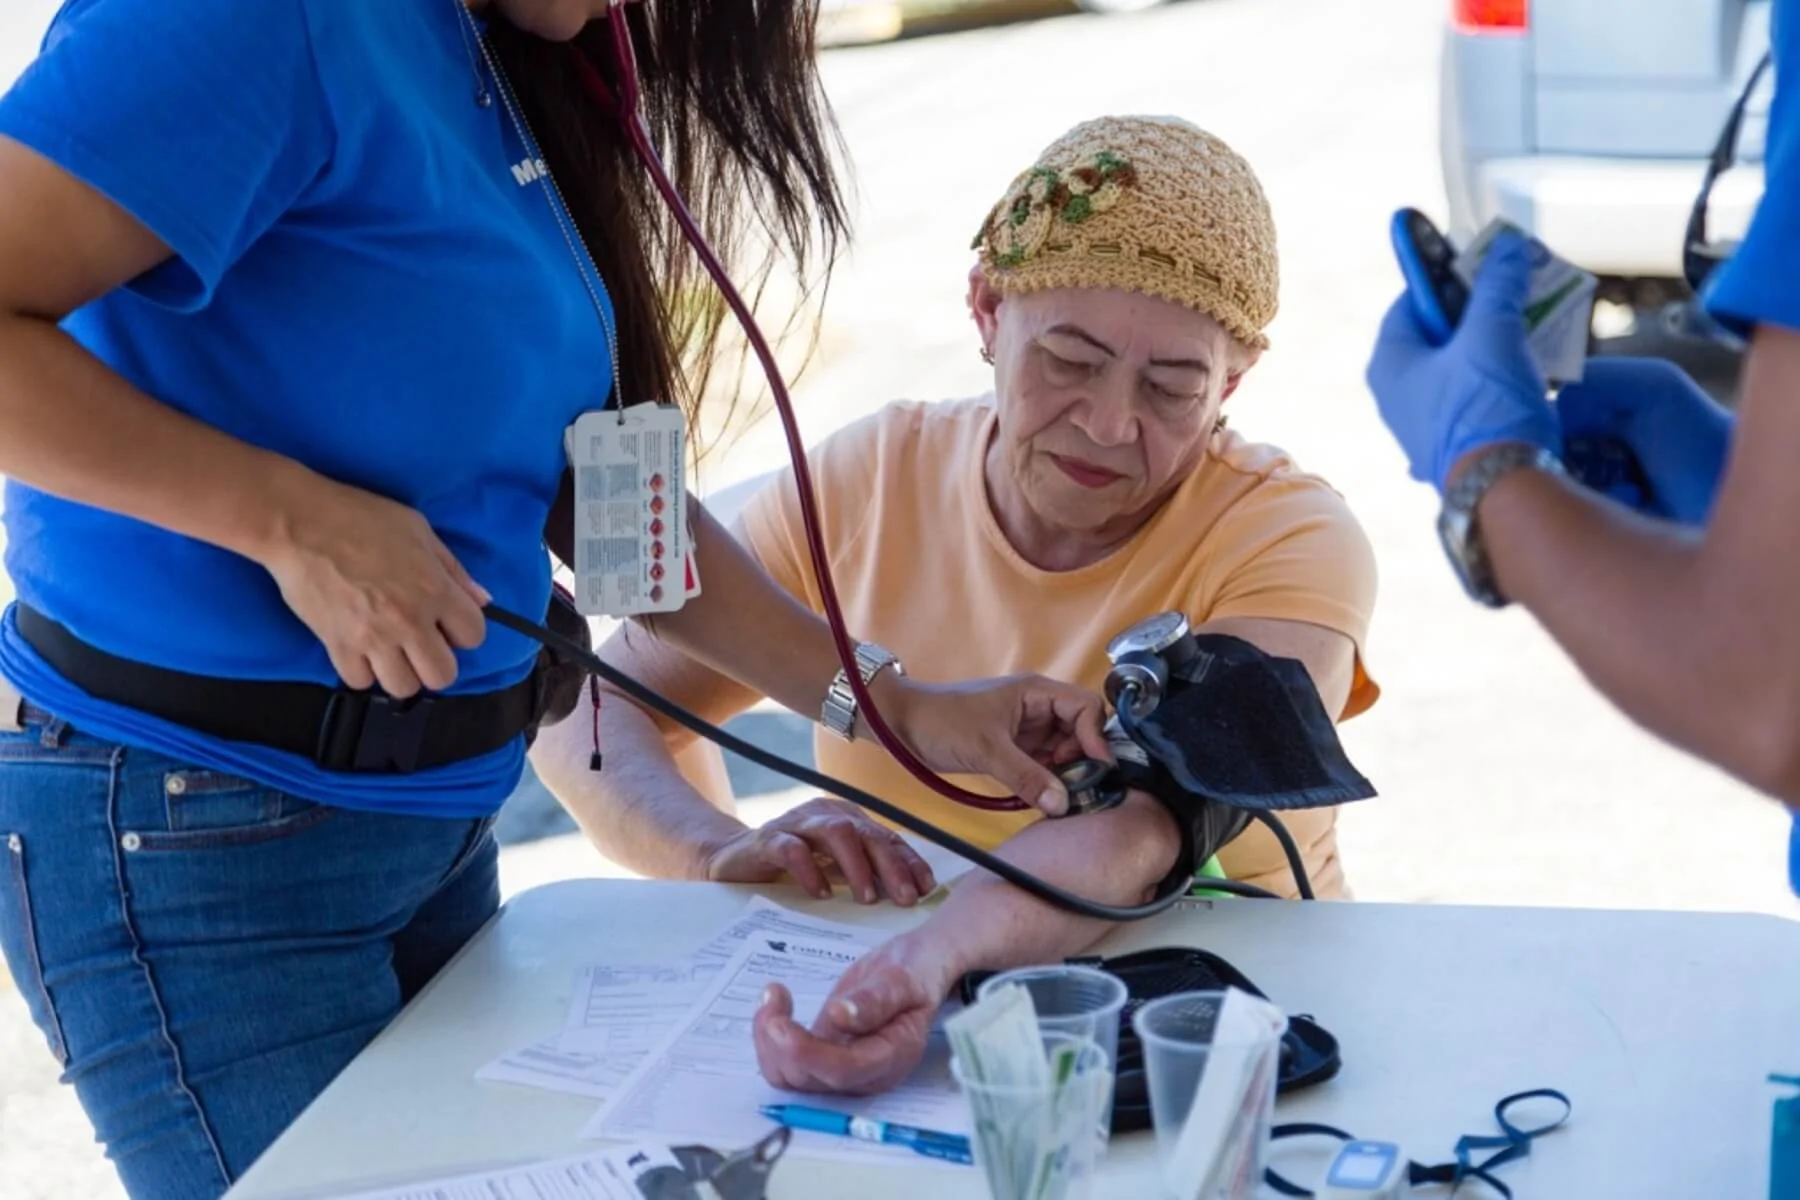 Relief worker takes blood pressure in an outdoor clinic in Puerto Rico